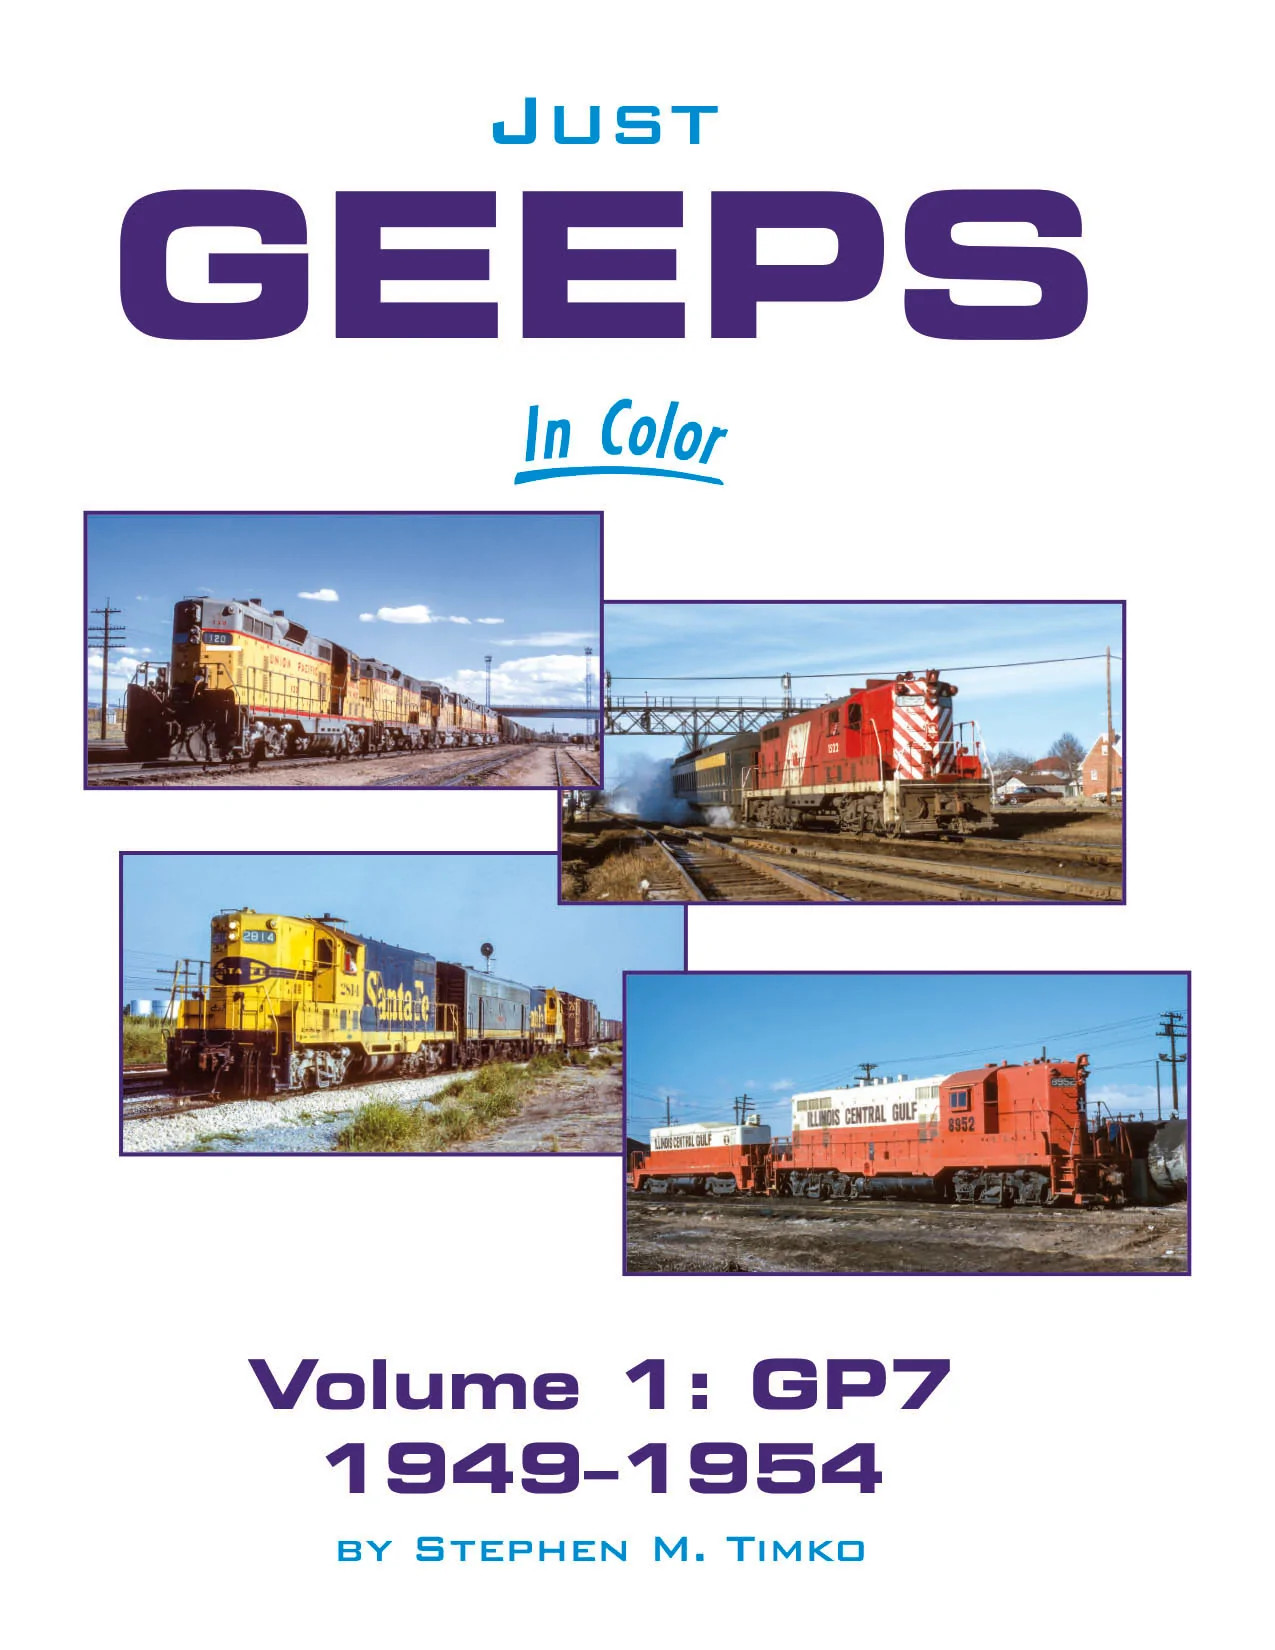 Morning Sun Books 1759 Just Geeps In Color Volume 1: GP7 1949-1954